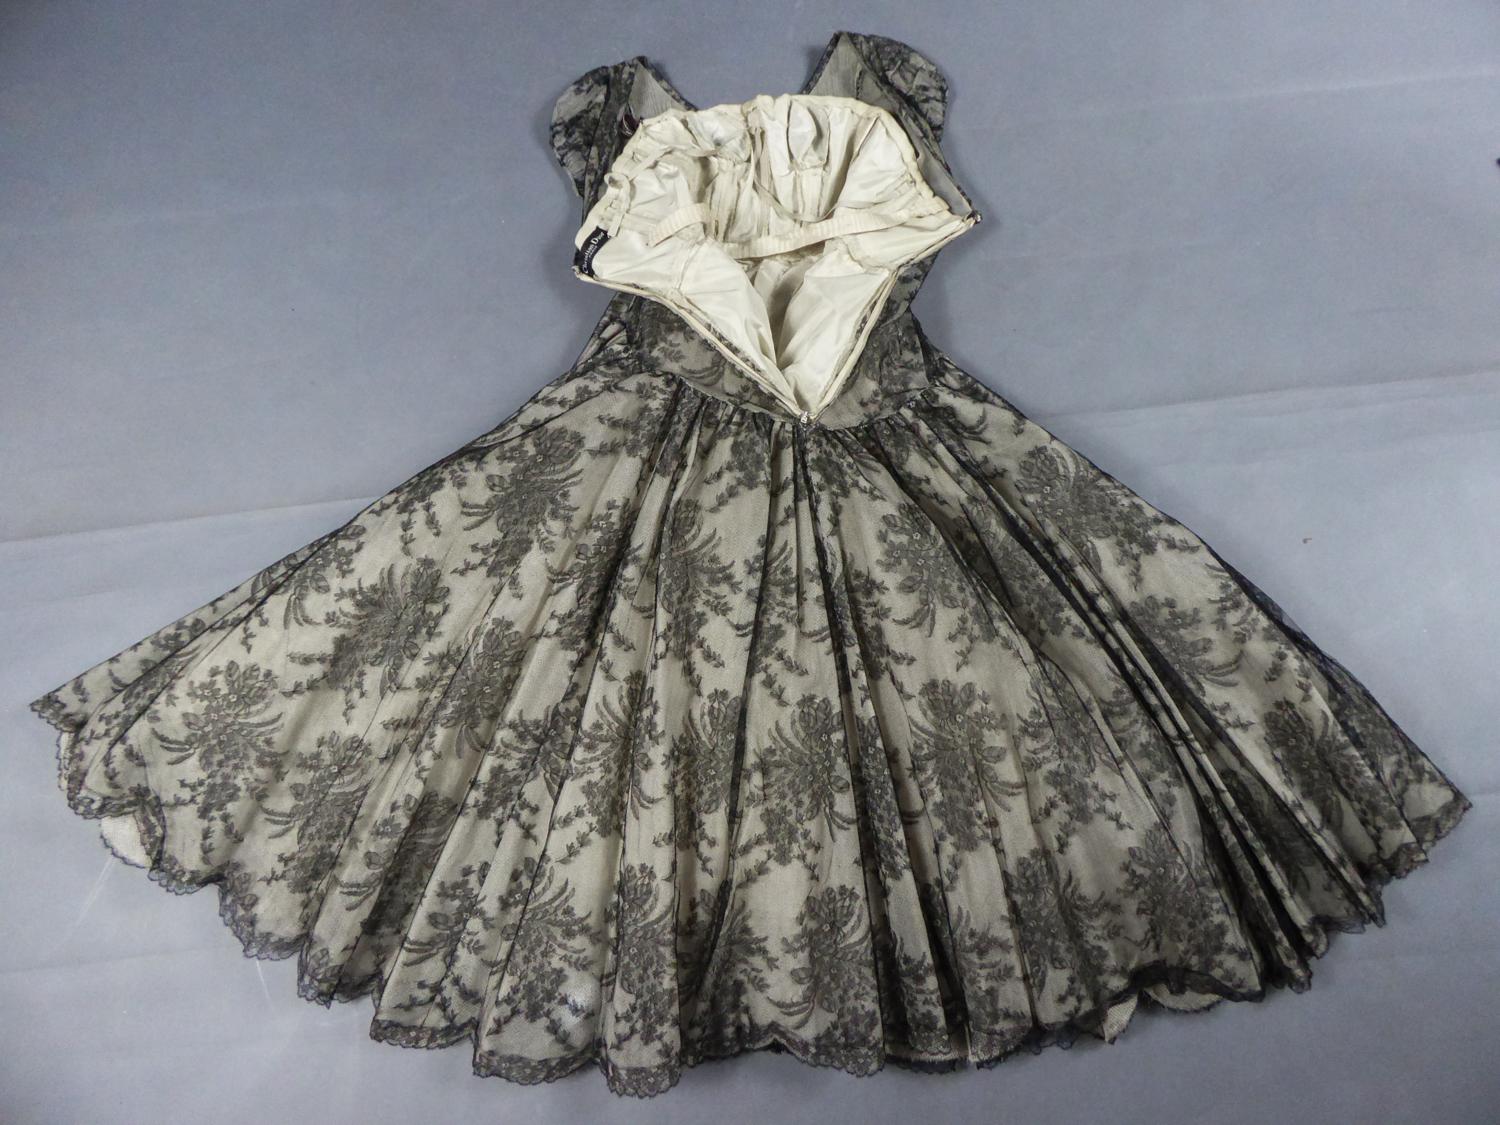 Ligne Oblique Collection (?) Circa 1948/1950
Paris France

A Collectible Calais black lace cocktail or ceremonial dress by Christian Dior. Black and white transparency effect obtained by superimposing a black bouquets lace on a cream taffeta lined